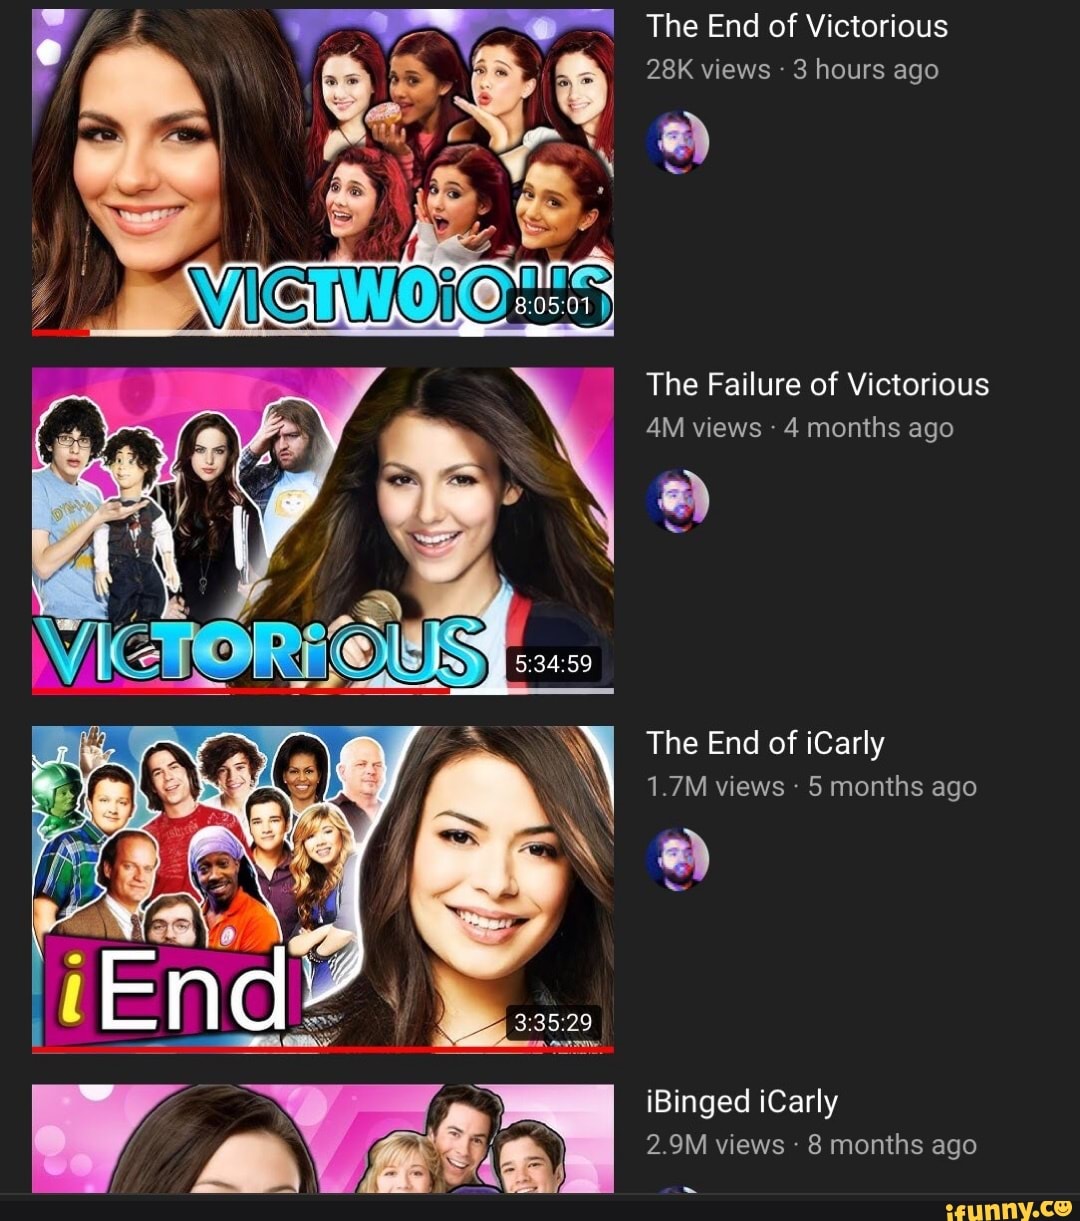 The End of Victorious views 3 hours ago The Failure of Victorious views 4  months ago The End of iCarly 1.7M views 5 months ago iBinged iCarly 2.9M  views 8 months ago - iFunny